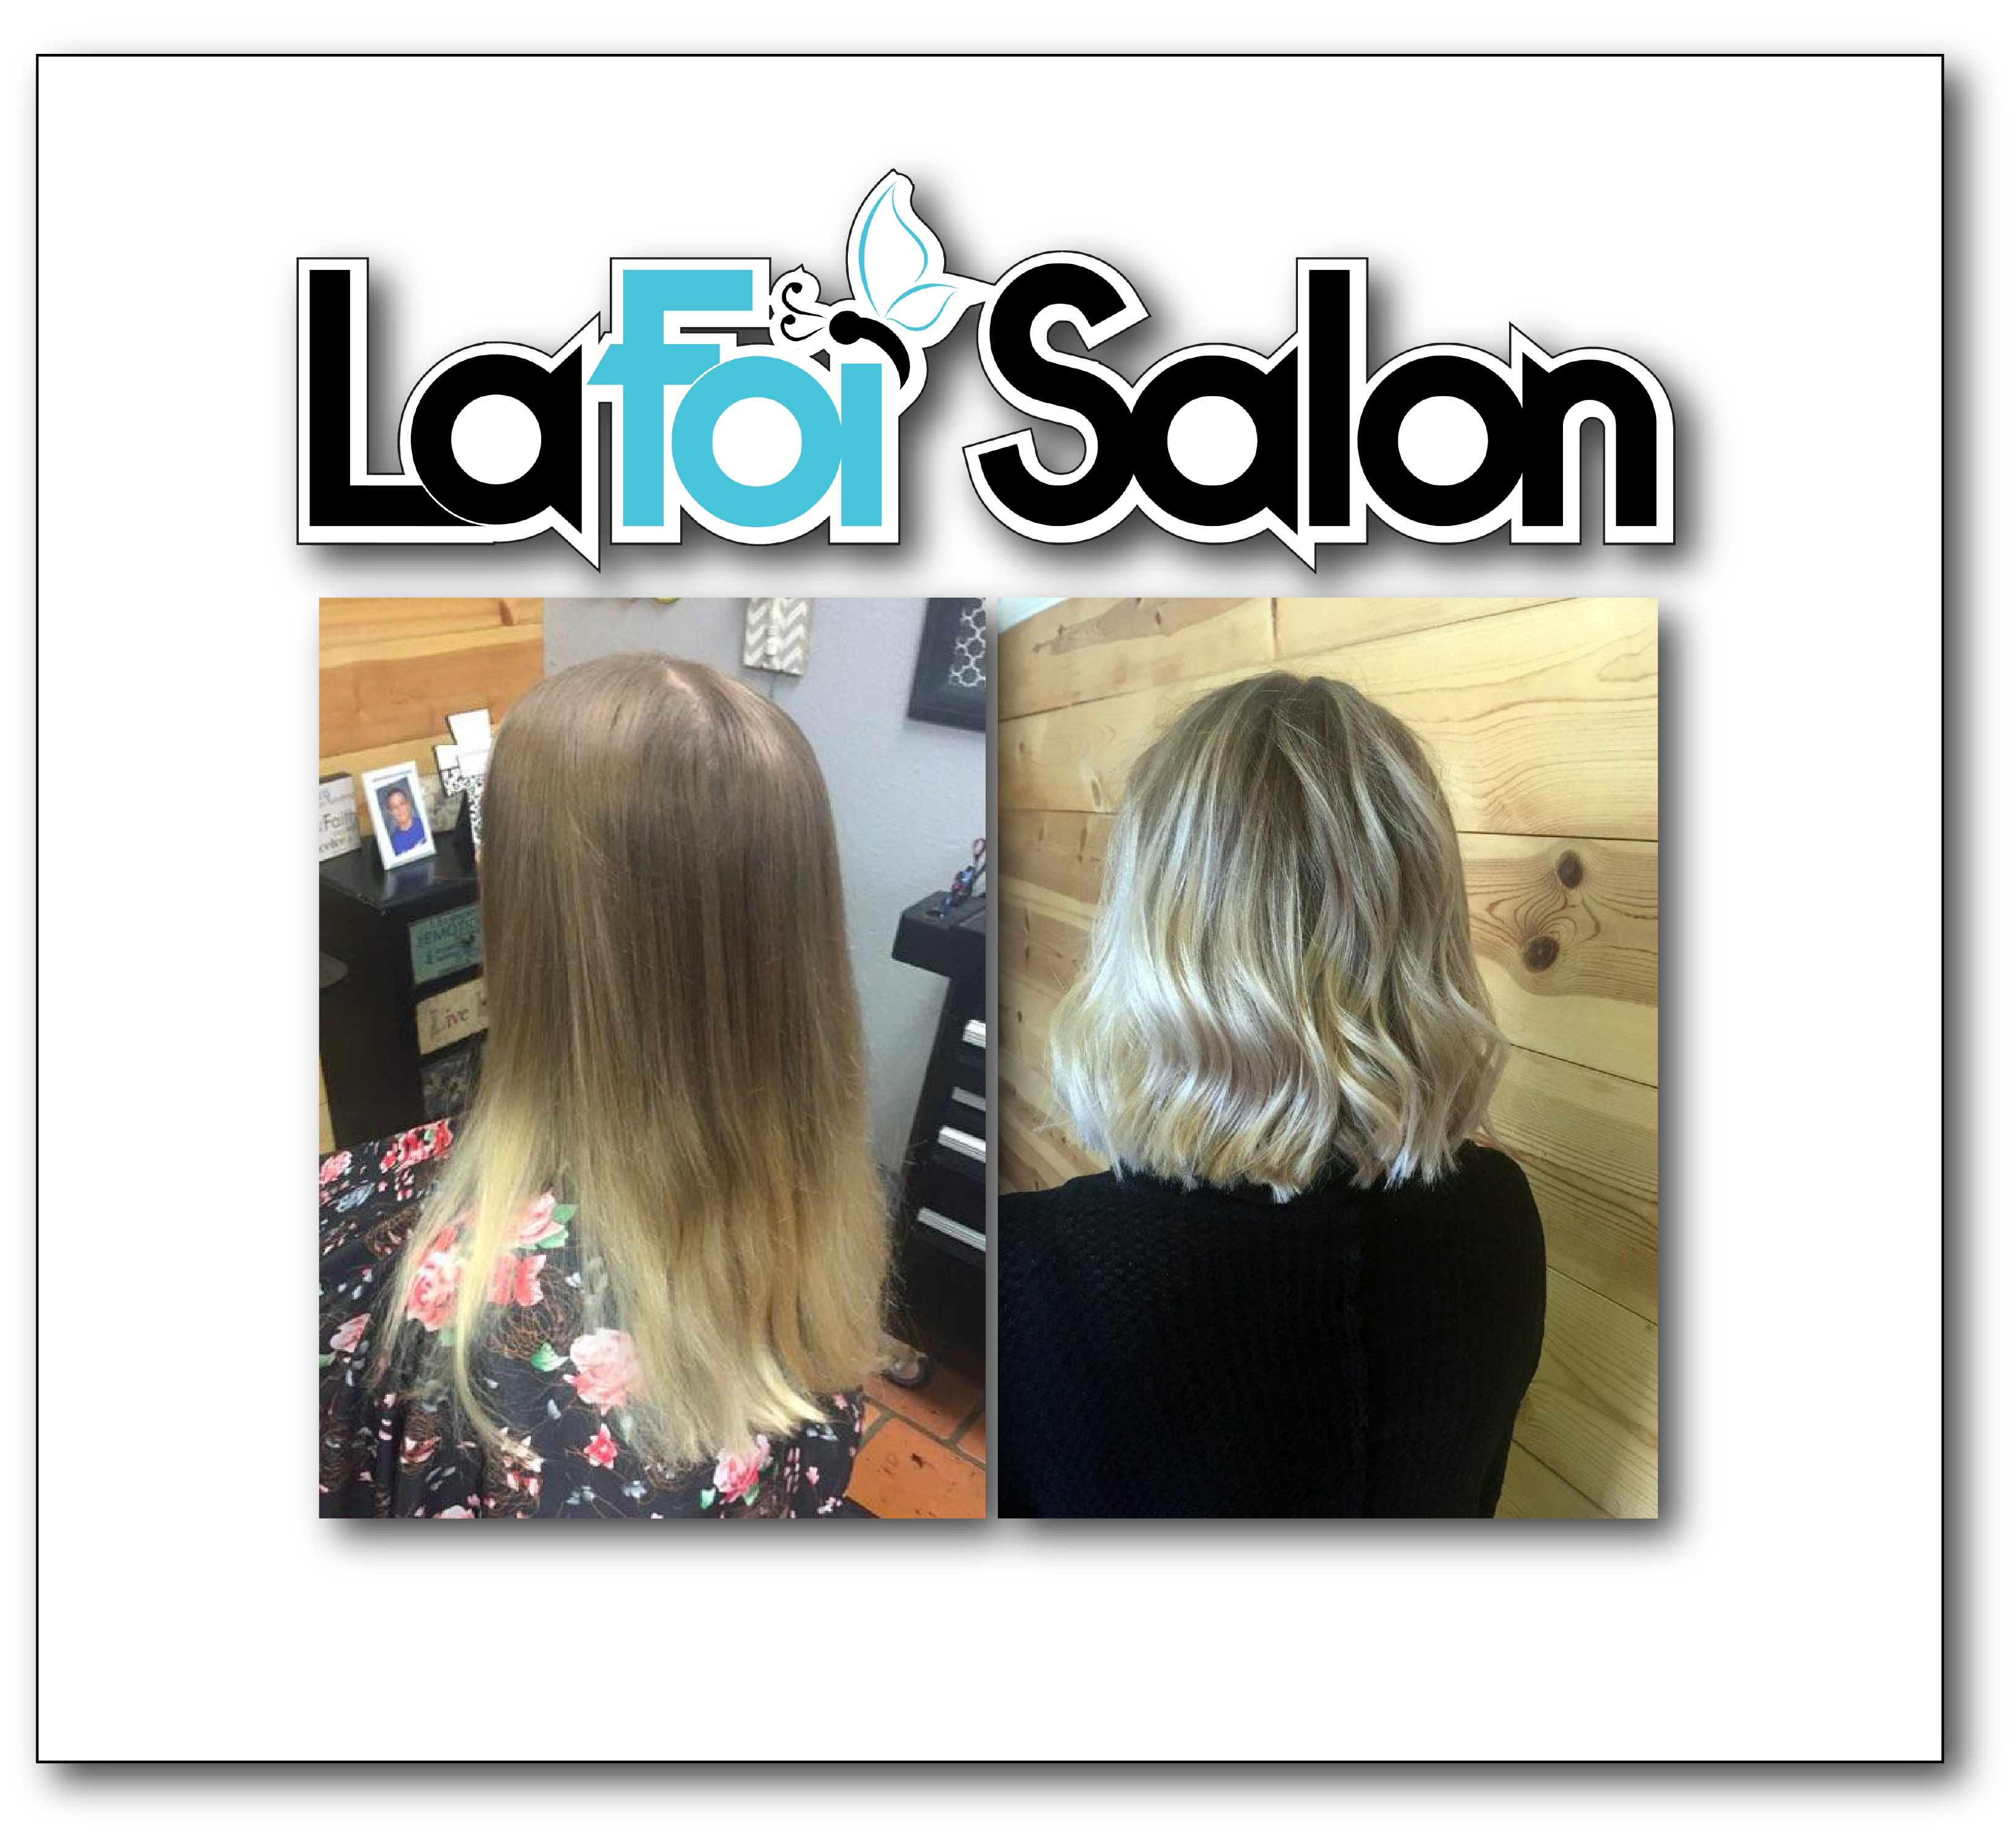 Change Is In The Air.... Call Today For Your Next Appointment!! (806) 771-4545 www.lafoisalon.com  lafoisalon  hairsalonslubbock